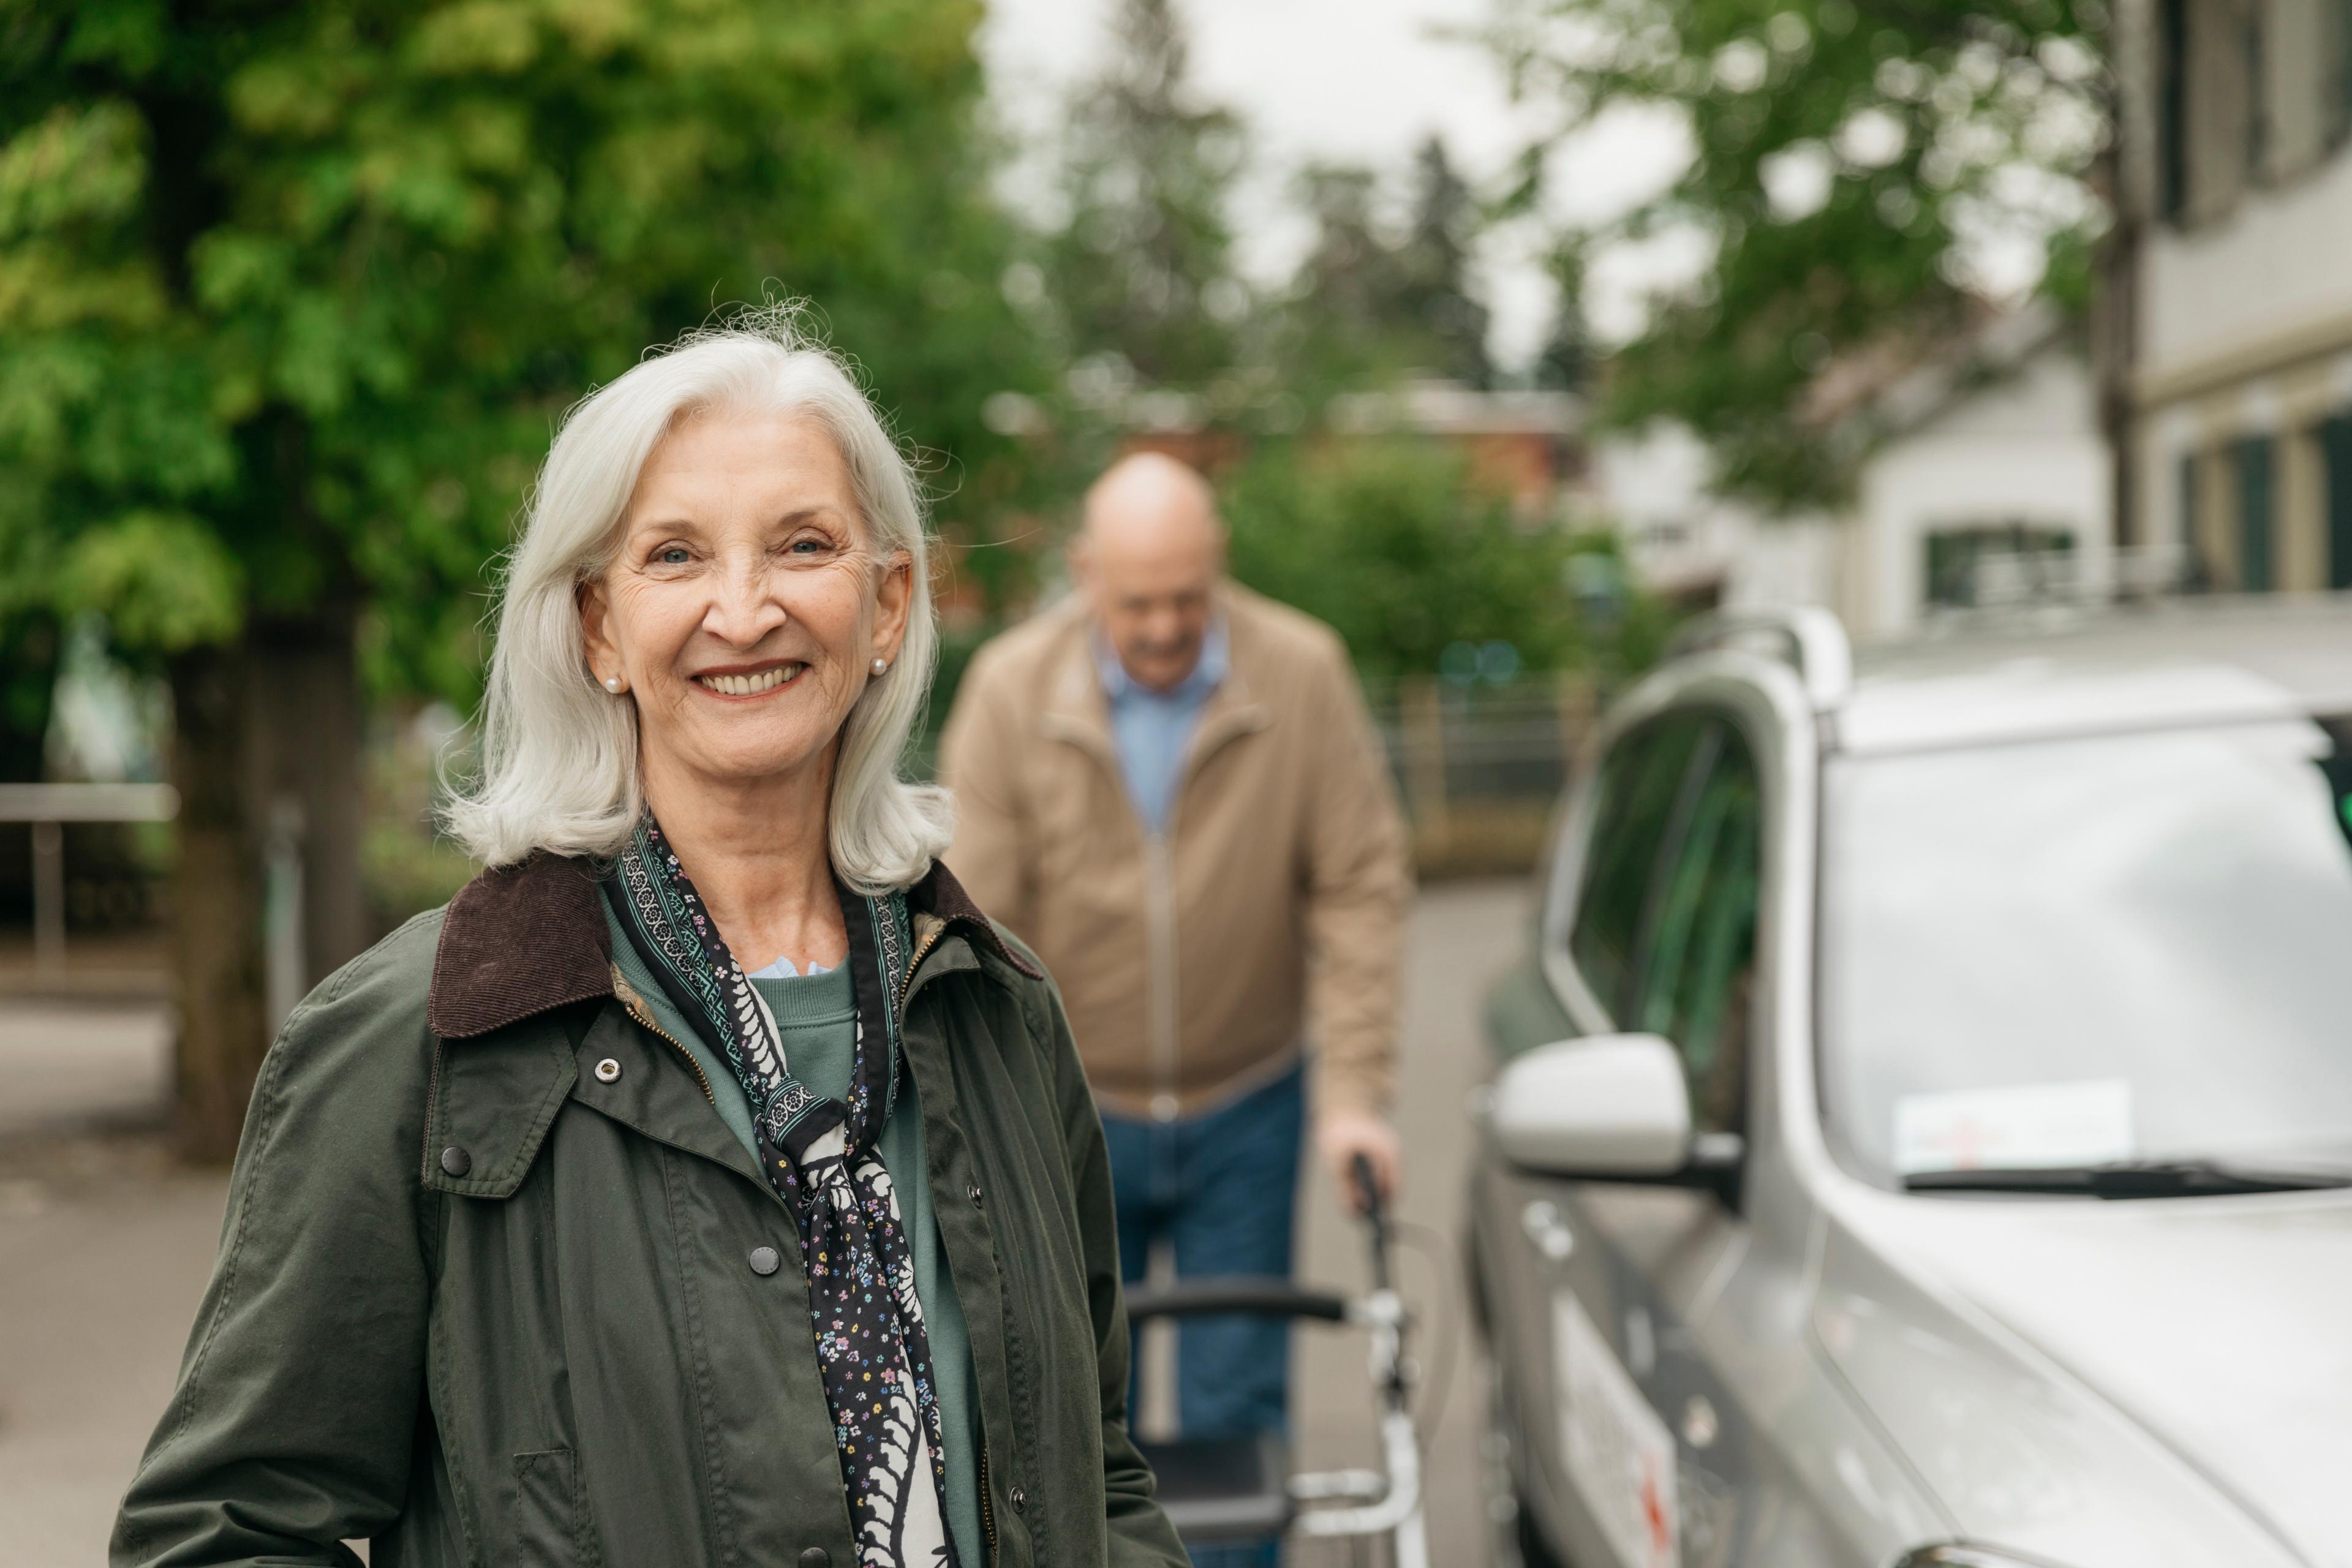 Transport service: A woman is smiling into the camera. Behind her is an elderly man with a rolling walker.